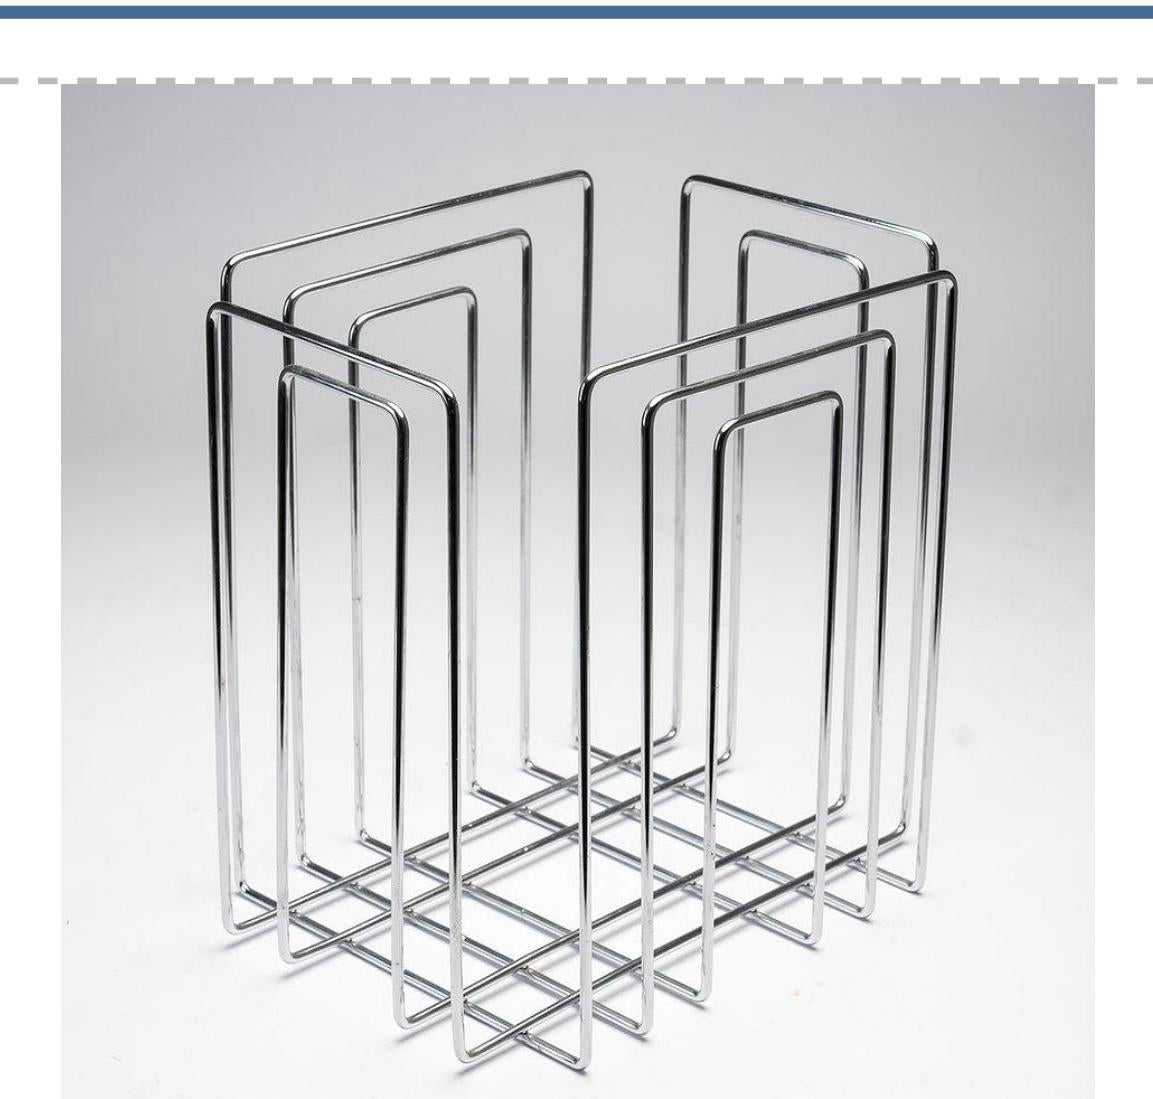 Willi Glaeser for Thomas Merlo & Partner, magazine holder, chromed steel, Switzerland, 1970- ies. Structure made of chrome-plated steel wires, embossed on the side.

Additional information:
Material: Steel, Chrome-plated
Dimensions: W 37 x D